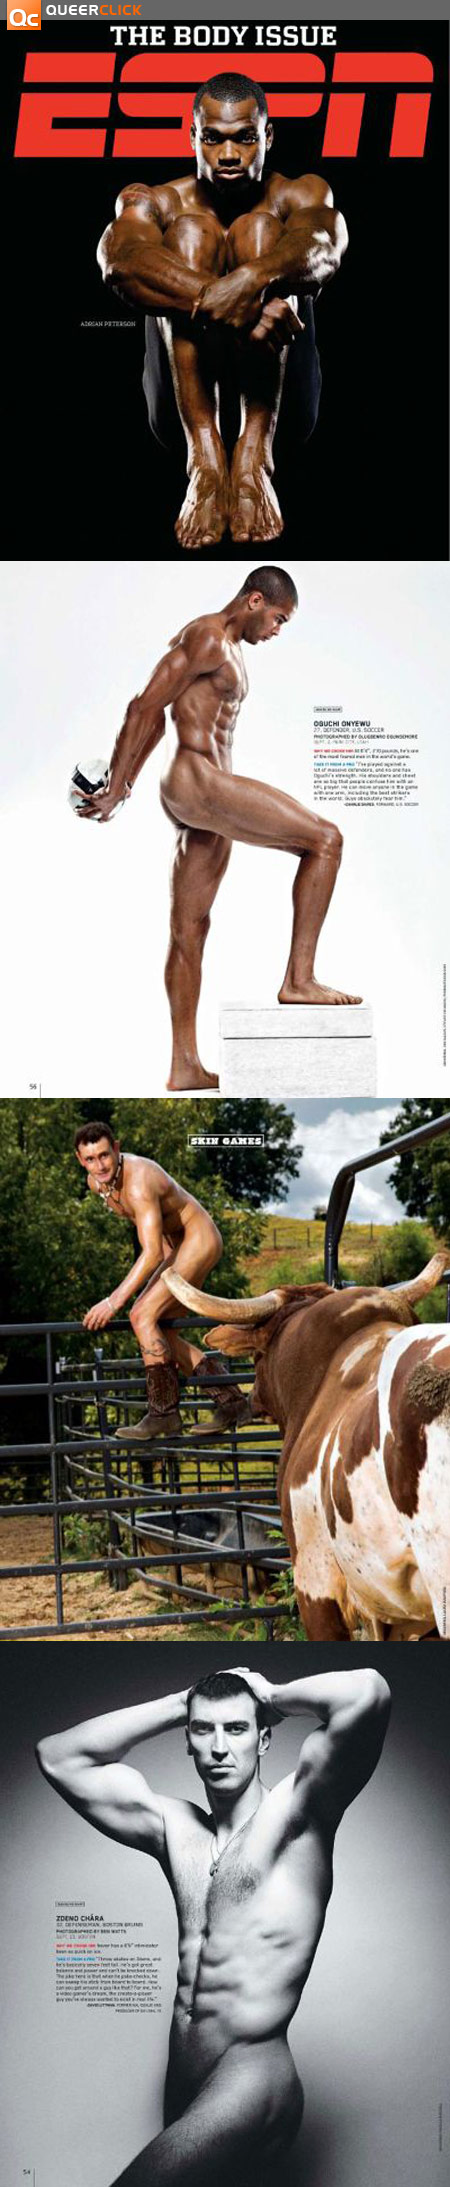 ESPN Mag's Body Issue Features Nude Pro Athletes